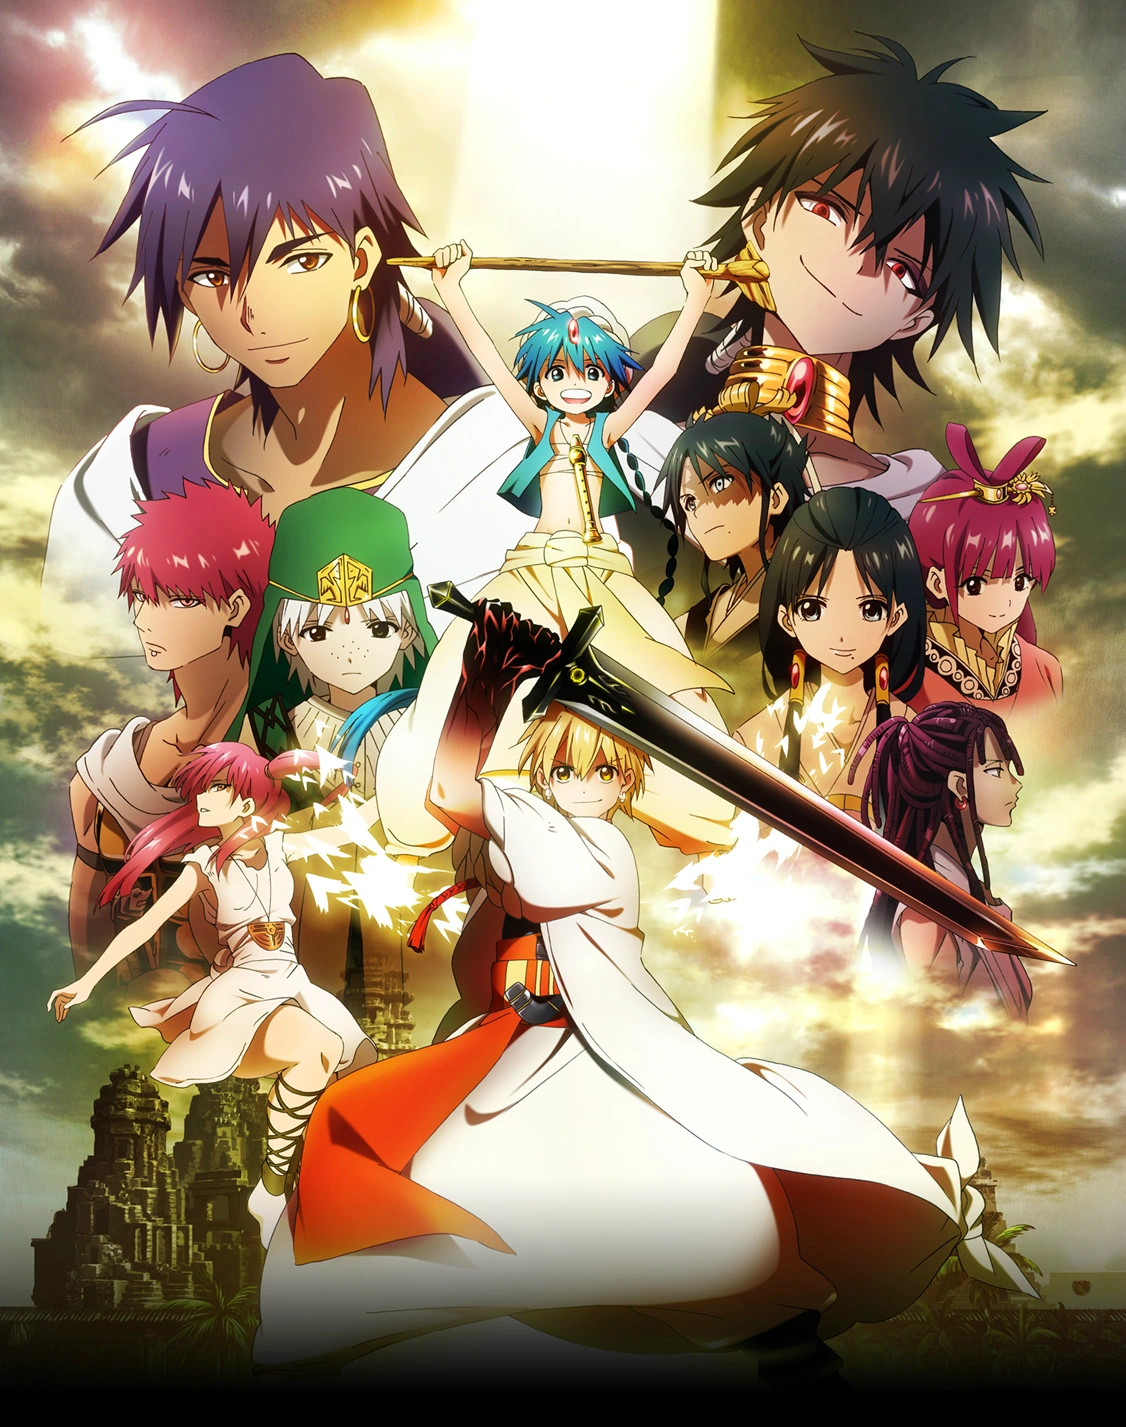 Magi: The Labyrinth of Magic, Ultimate Pop Culture Wiki